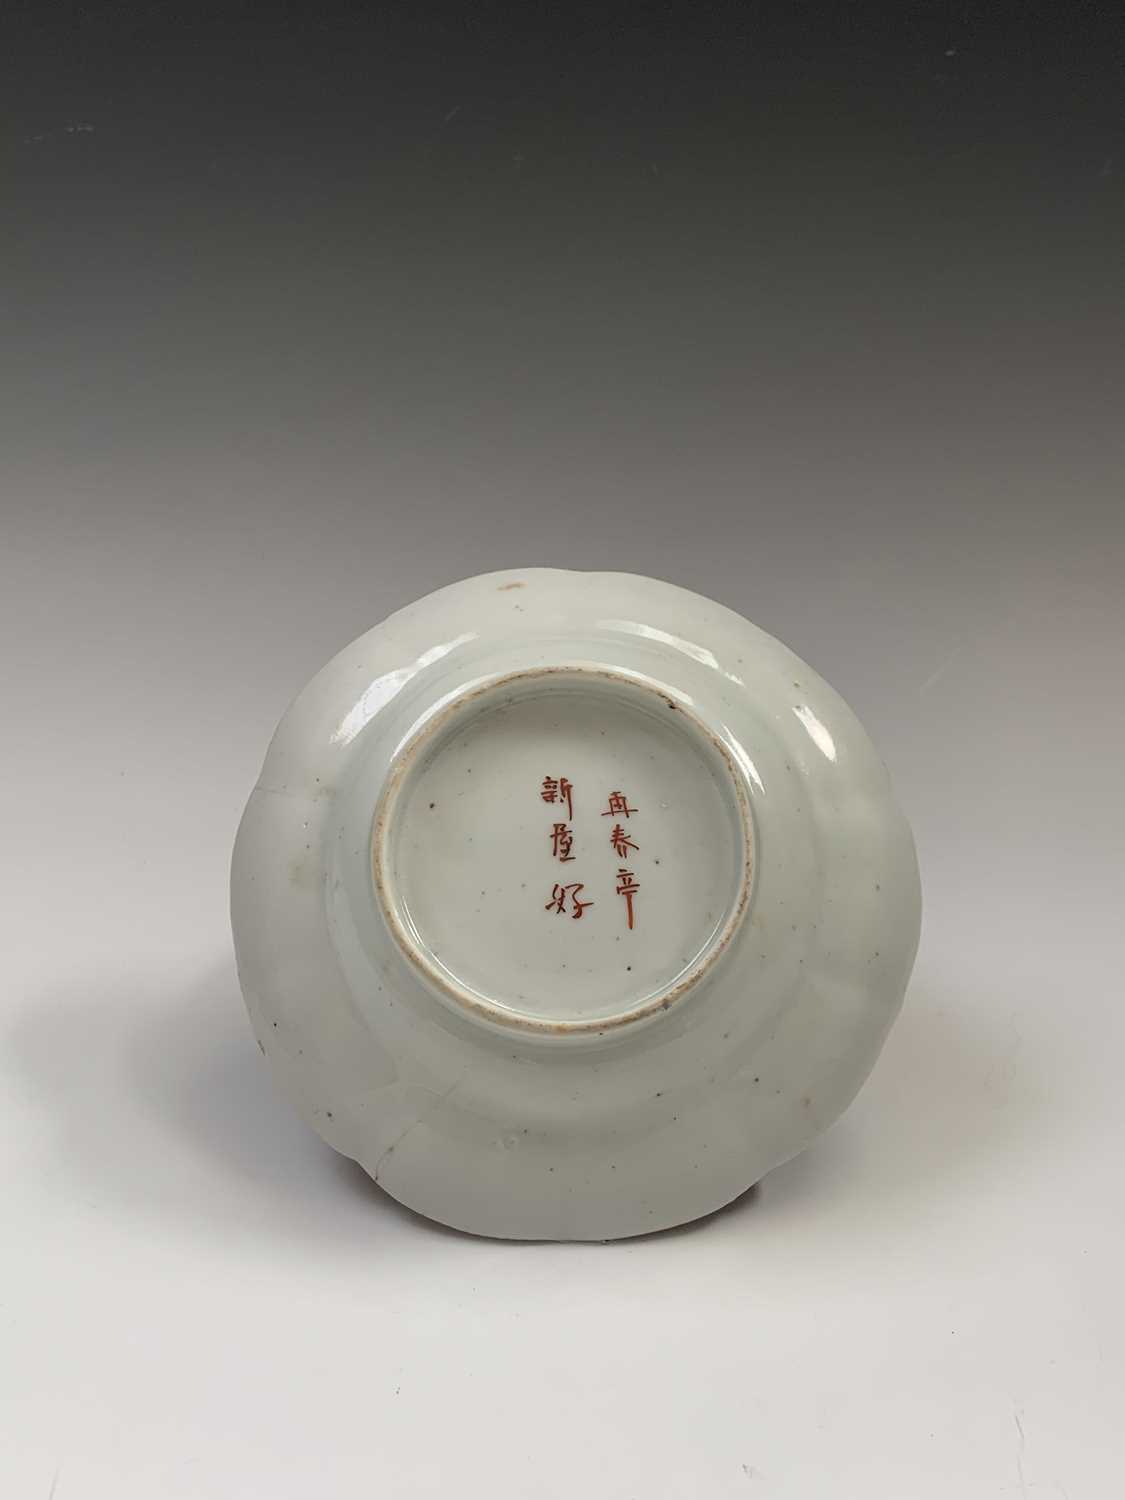 A Chinese painted enamel box and cover, 19th century, height 4cm, diameter 5.5cm, together with a - Image 4 of 4